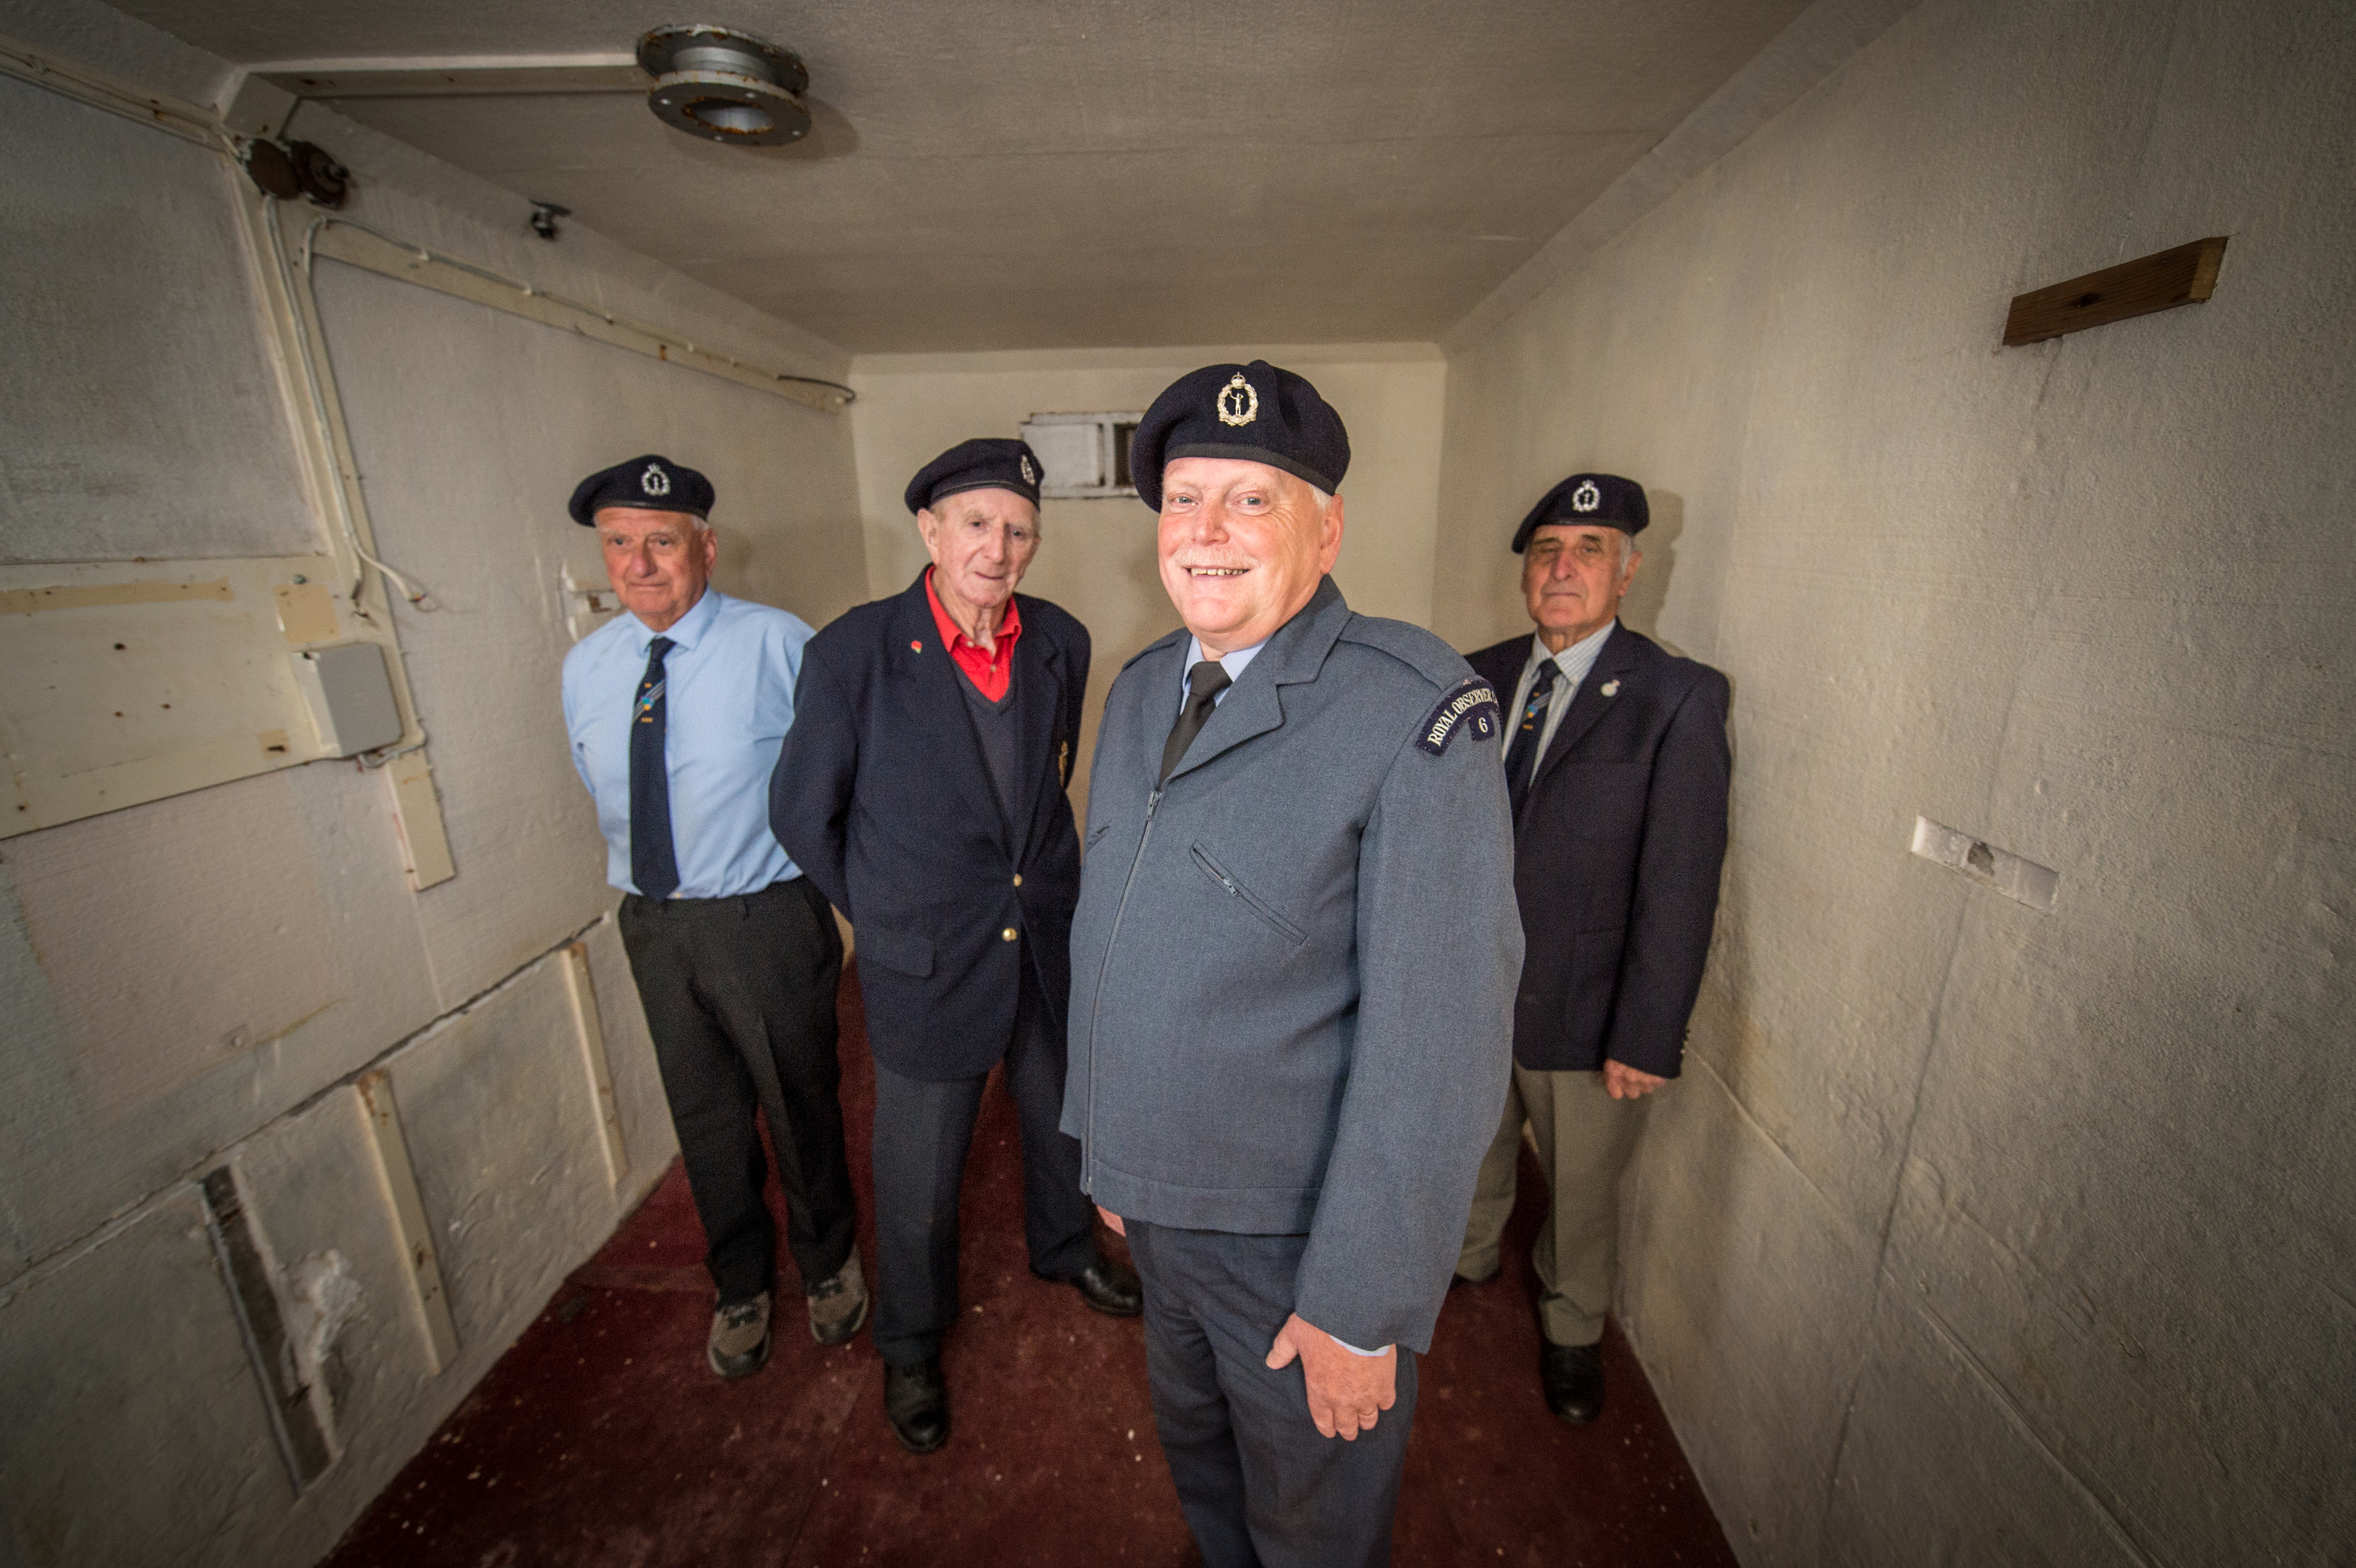 William Angus, leading observer, Jimmy Green observer lieutenant of 43 years, George Anthony  observer officer of 20 years and John Munro chief observer of 23 years.